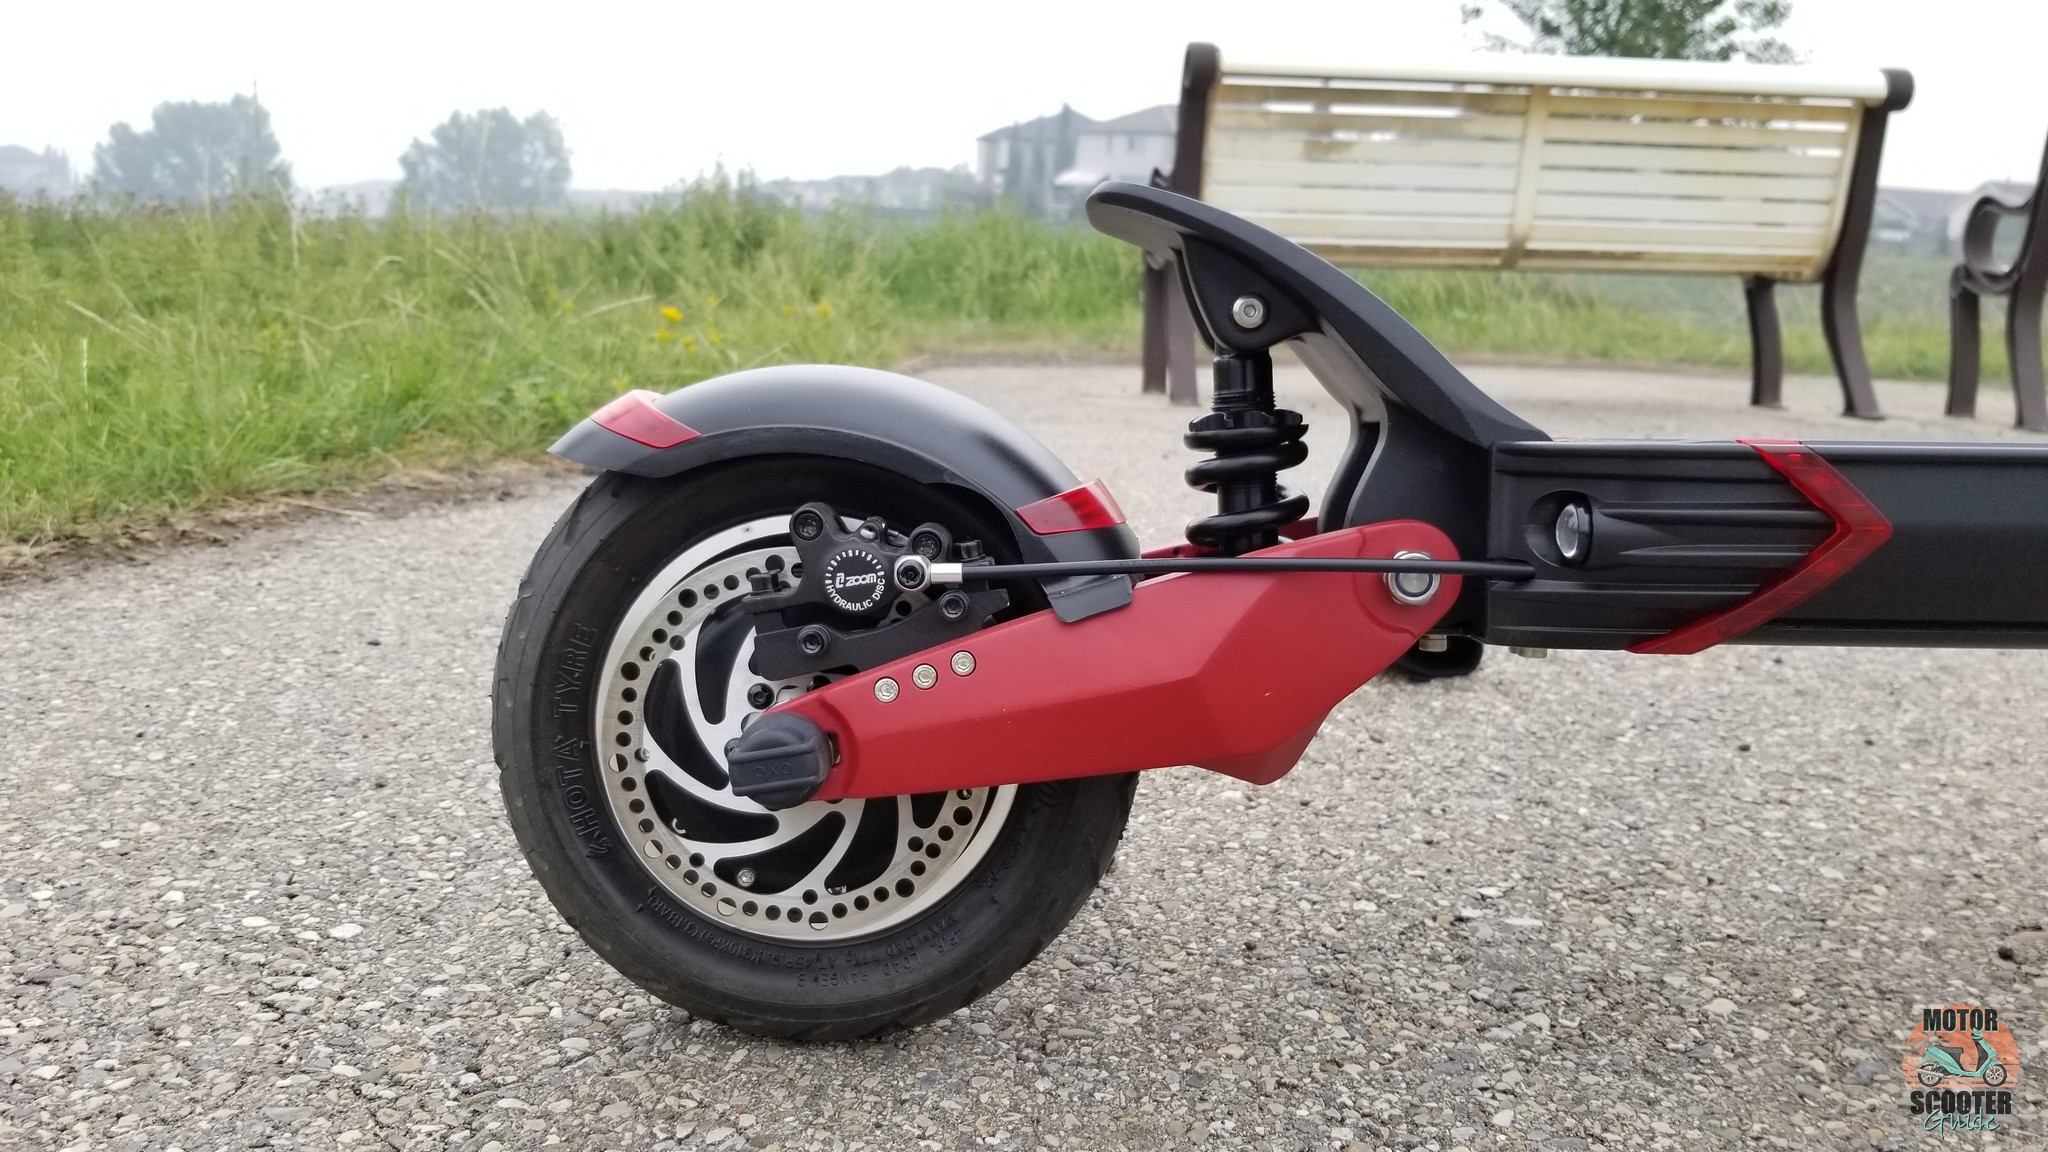 Closeup of rear wheel showing off disc brakes and suspension